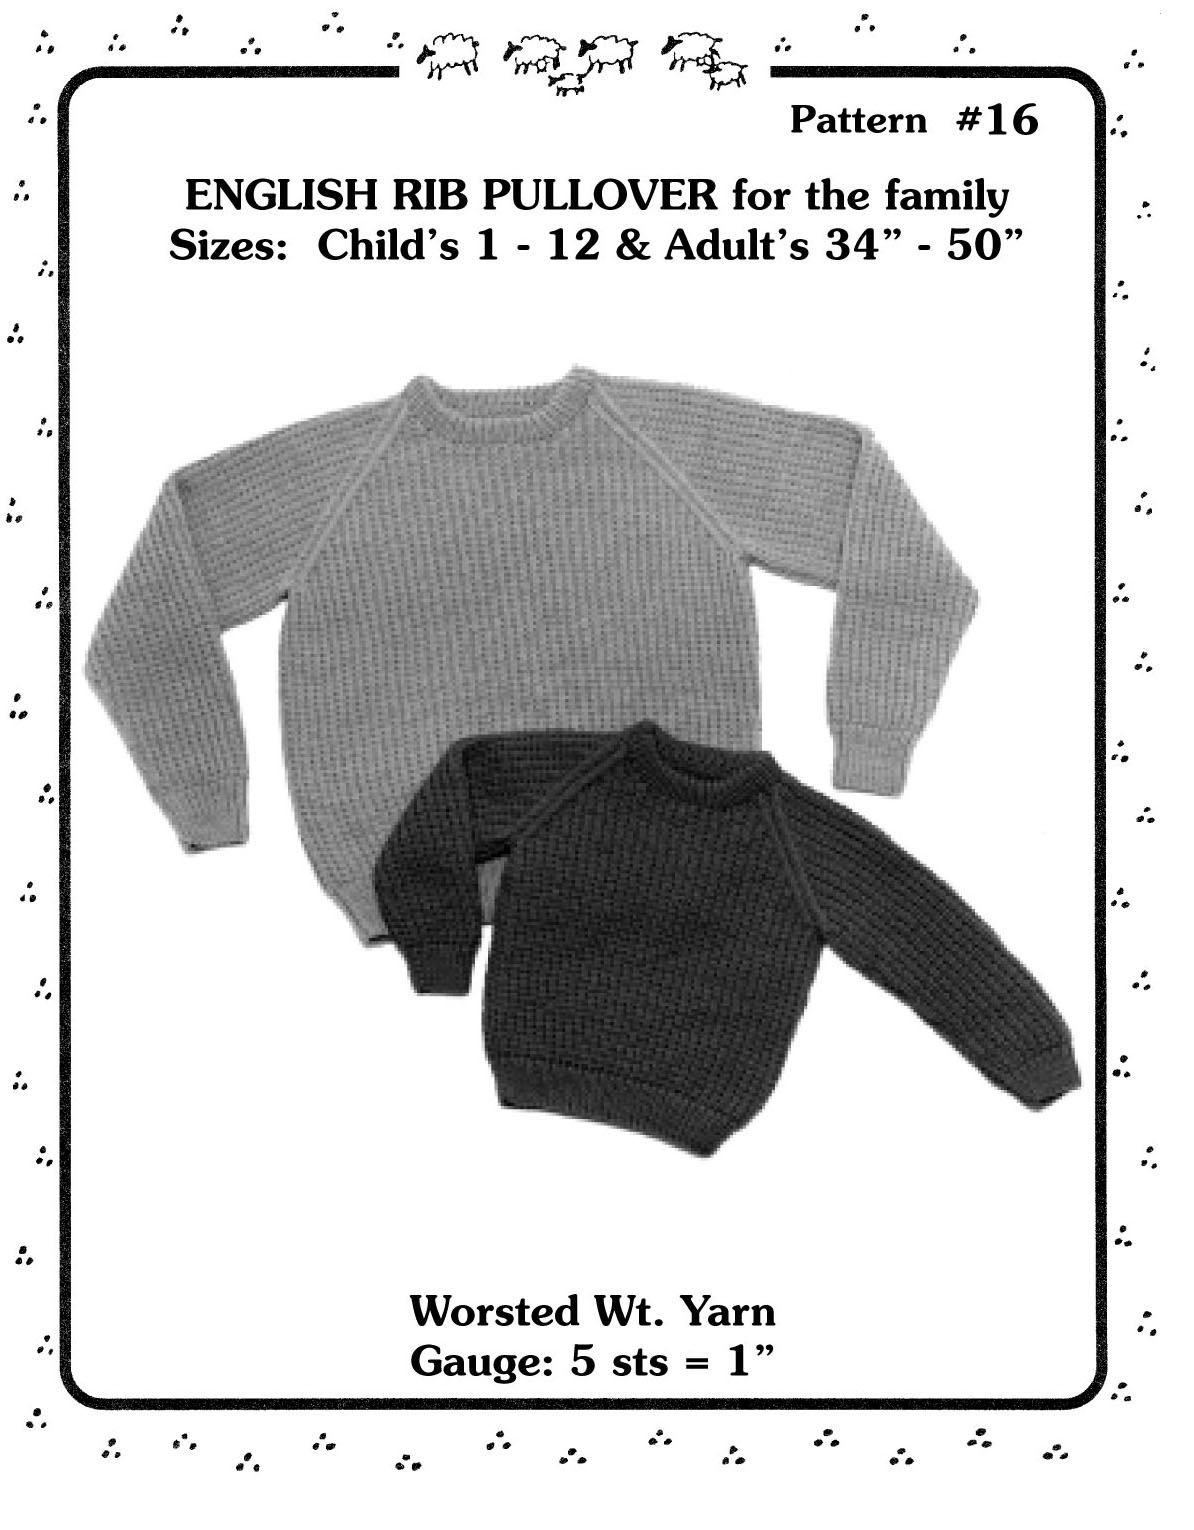 Yankee Knitters English Rib Pullover for the Family  - Size Child 1-12 & Adult 3